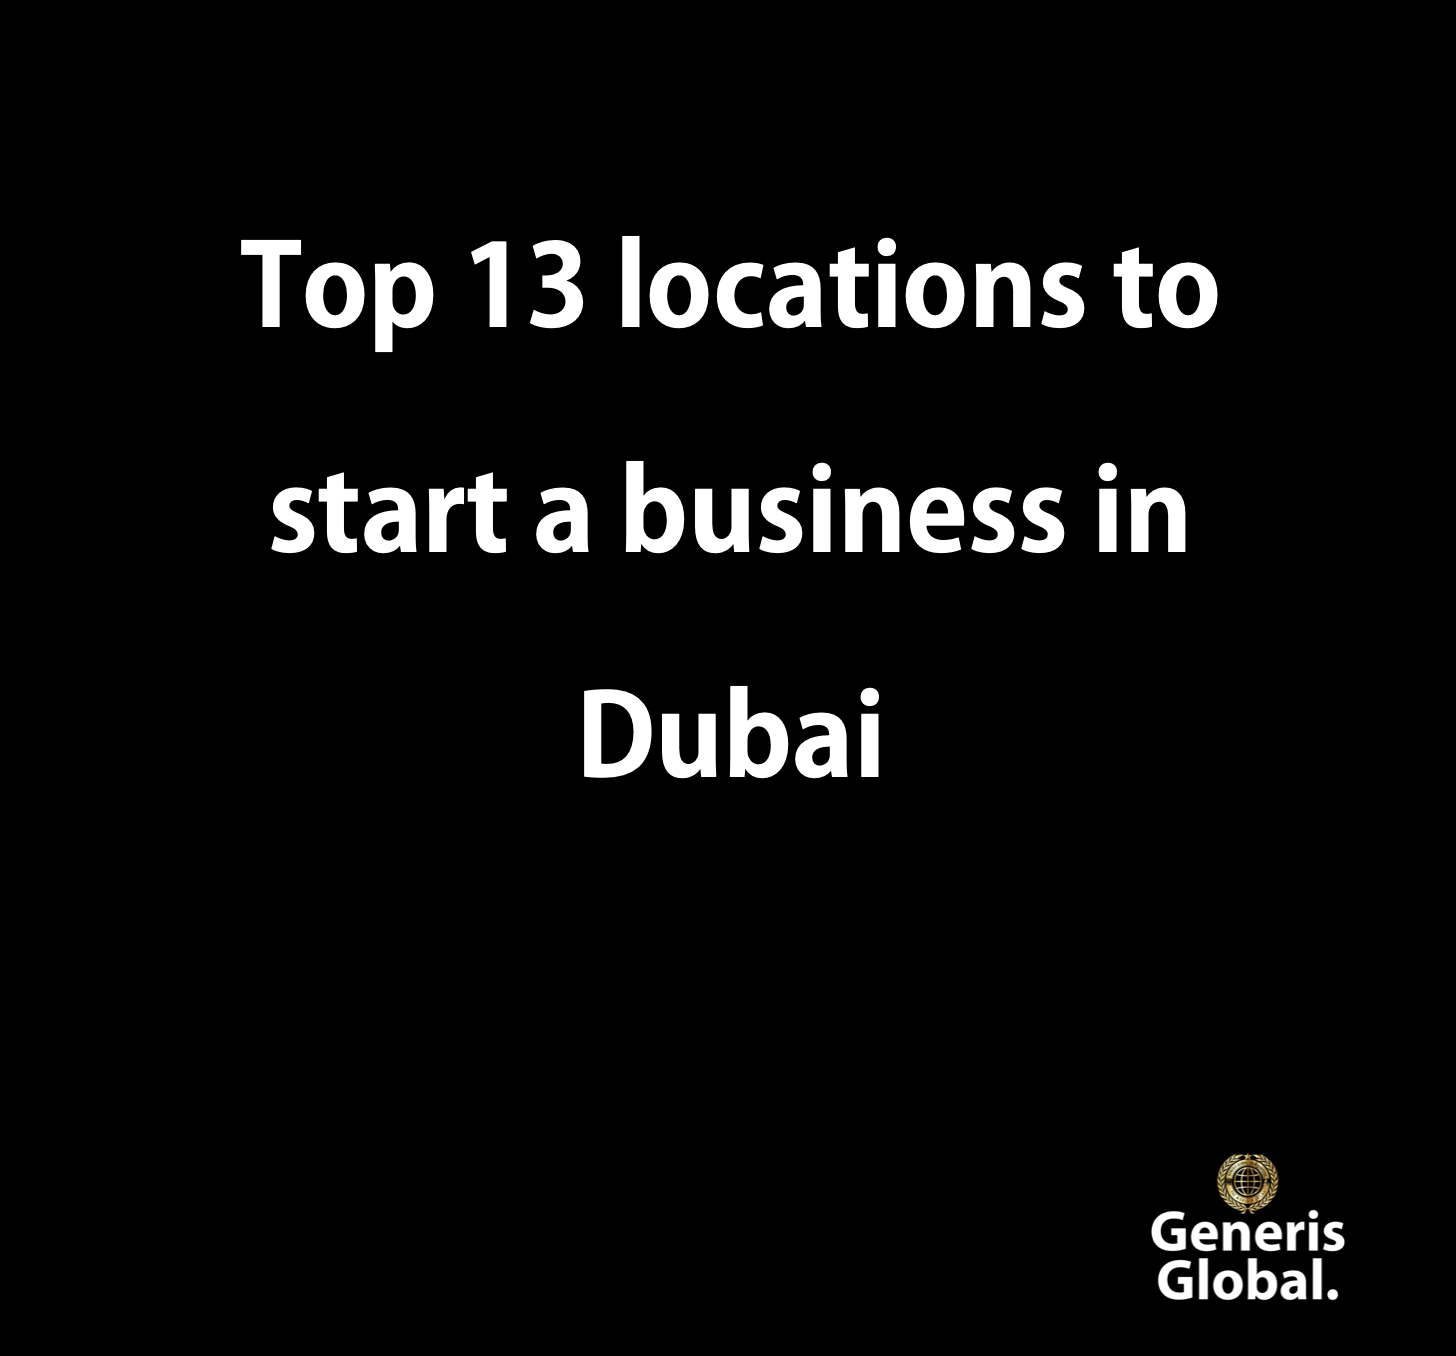 Top 13 locations to start a business in Dubai